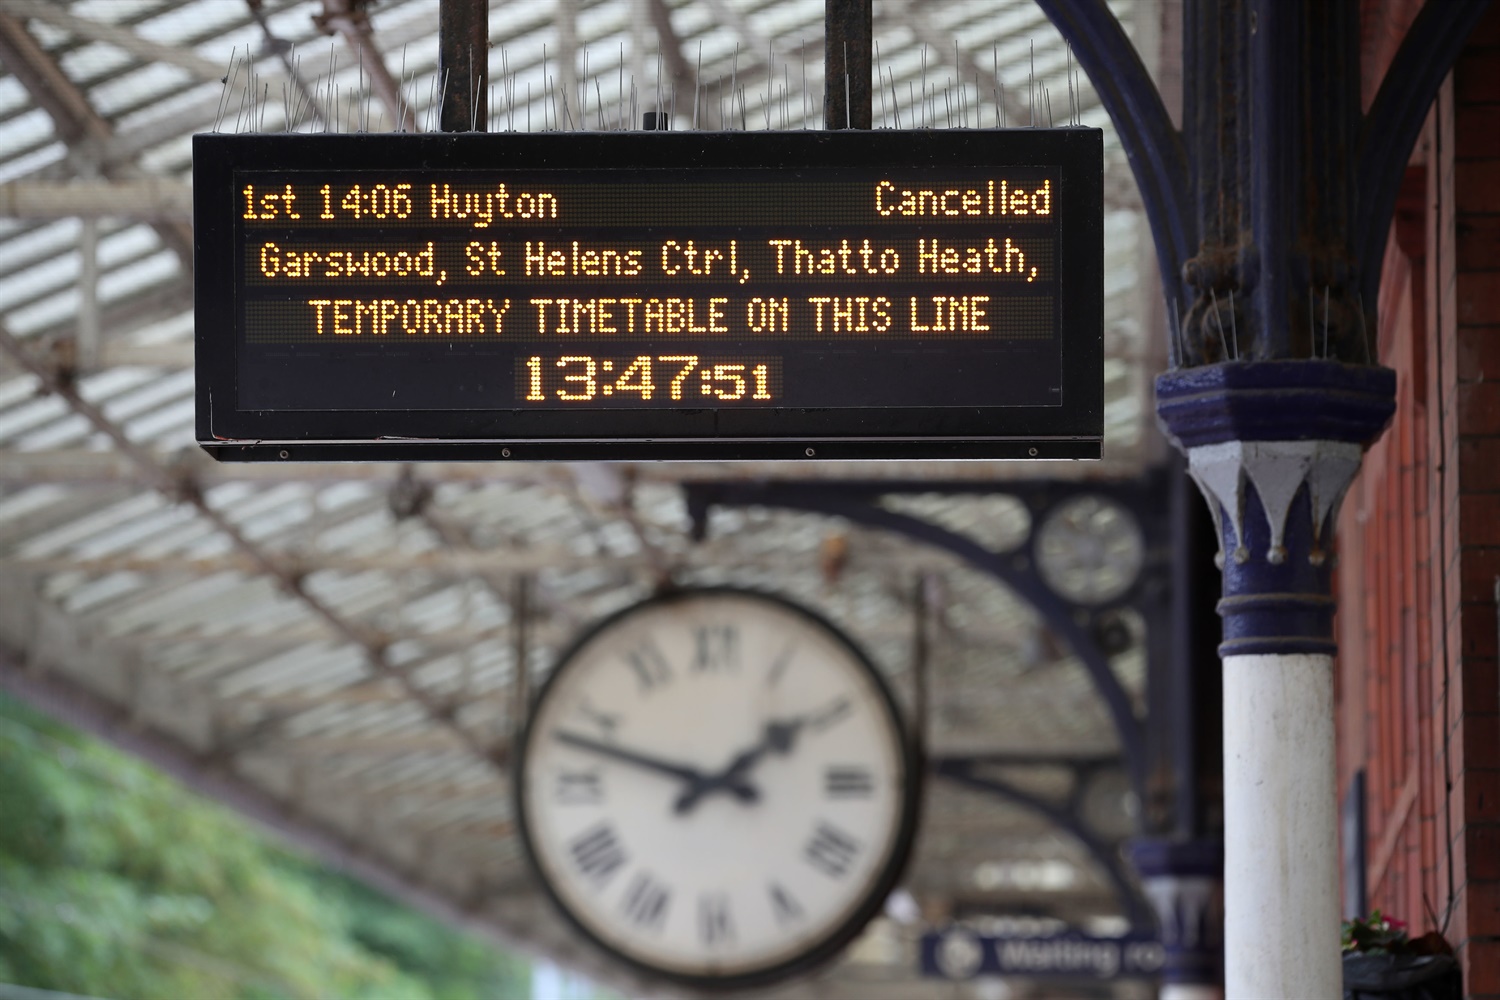 ‘Still too many’ delays and cancellations, despite interim Northern timetable